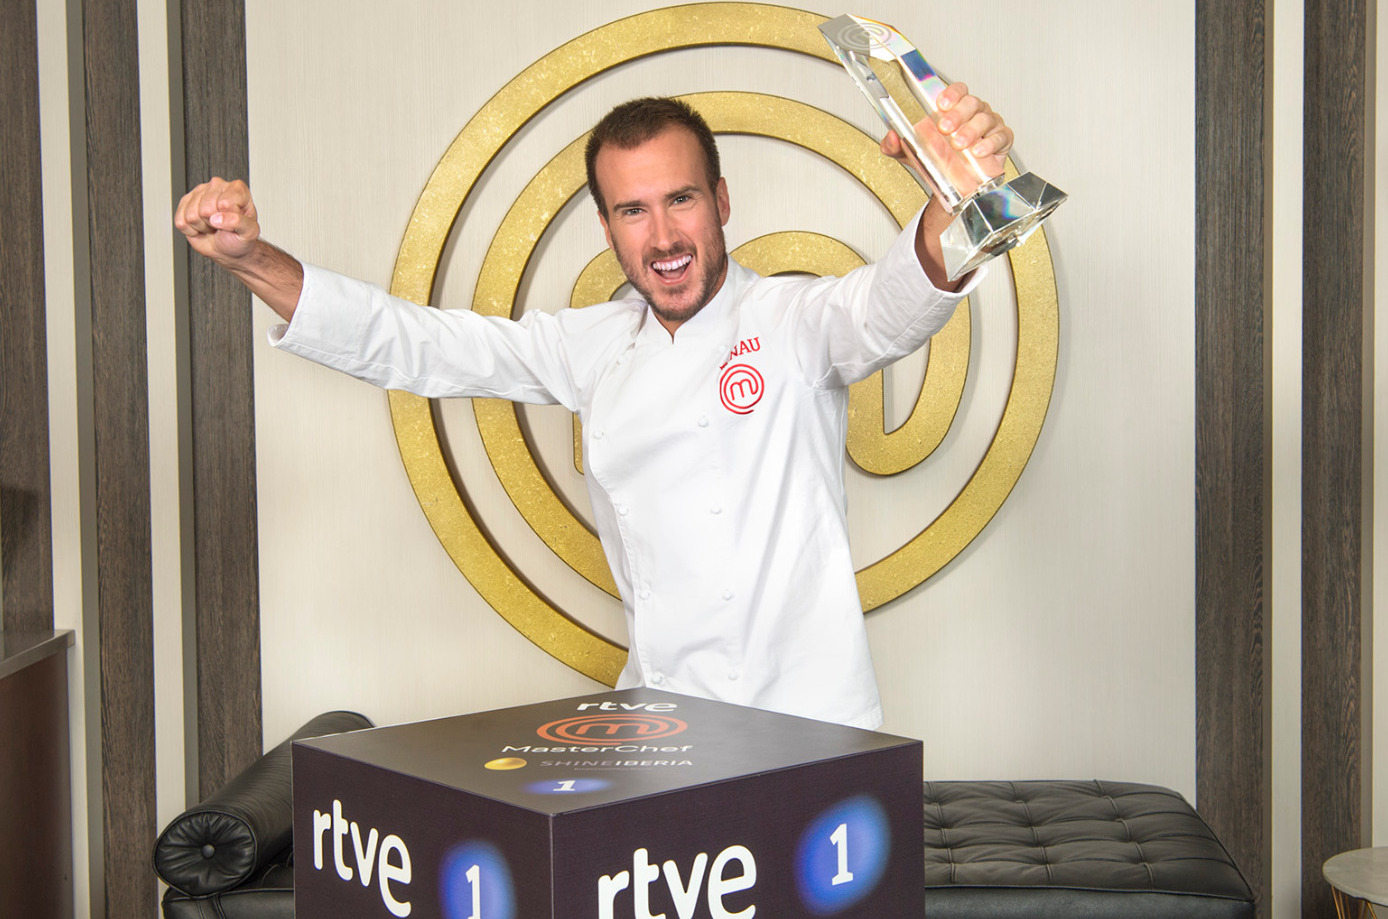 Arnau wins ‘MasterChef 9’ with a season record: more than 2 million viewers, 21.9% of share